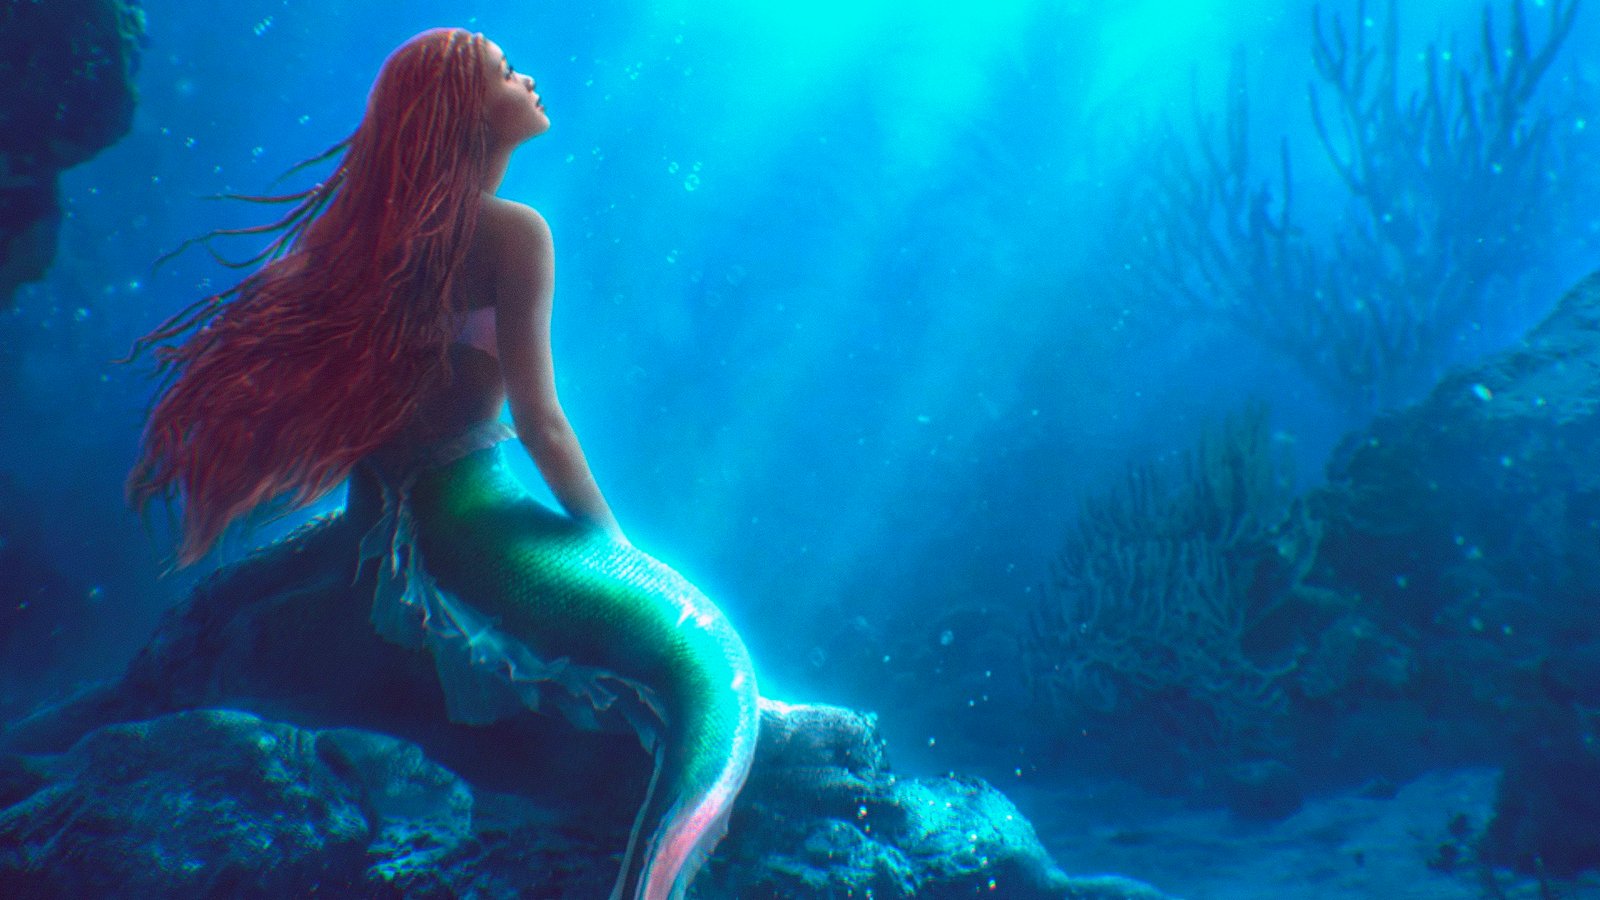 How Disney's The Little Mermaid Changed Studio's Approach to